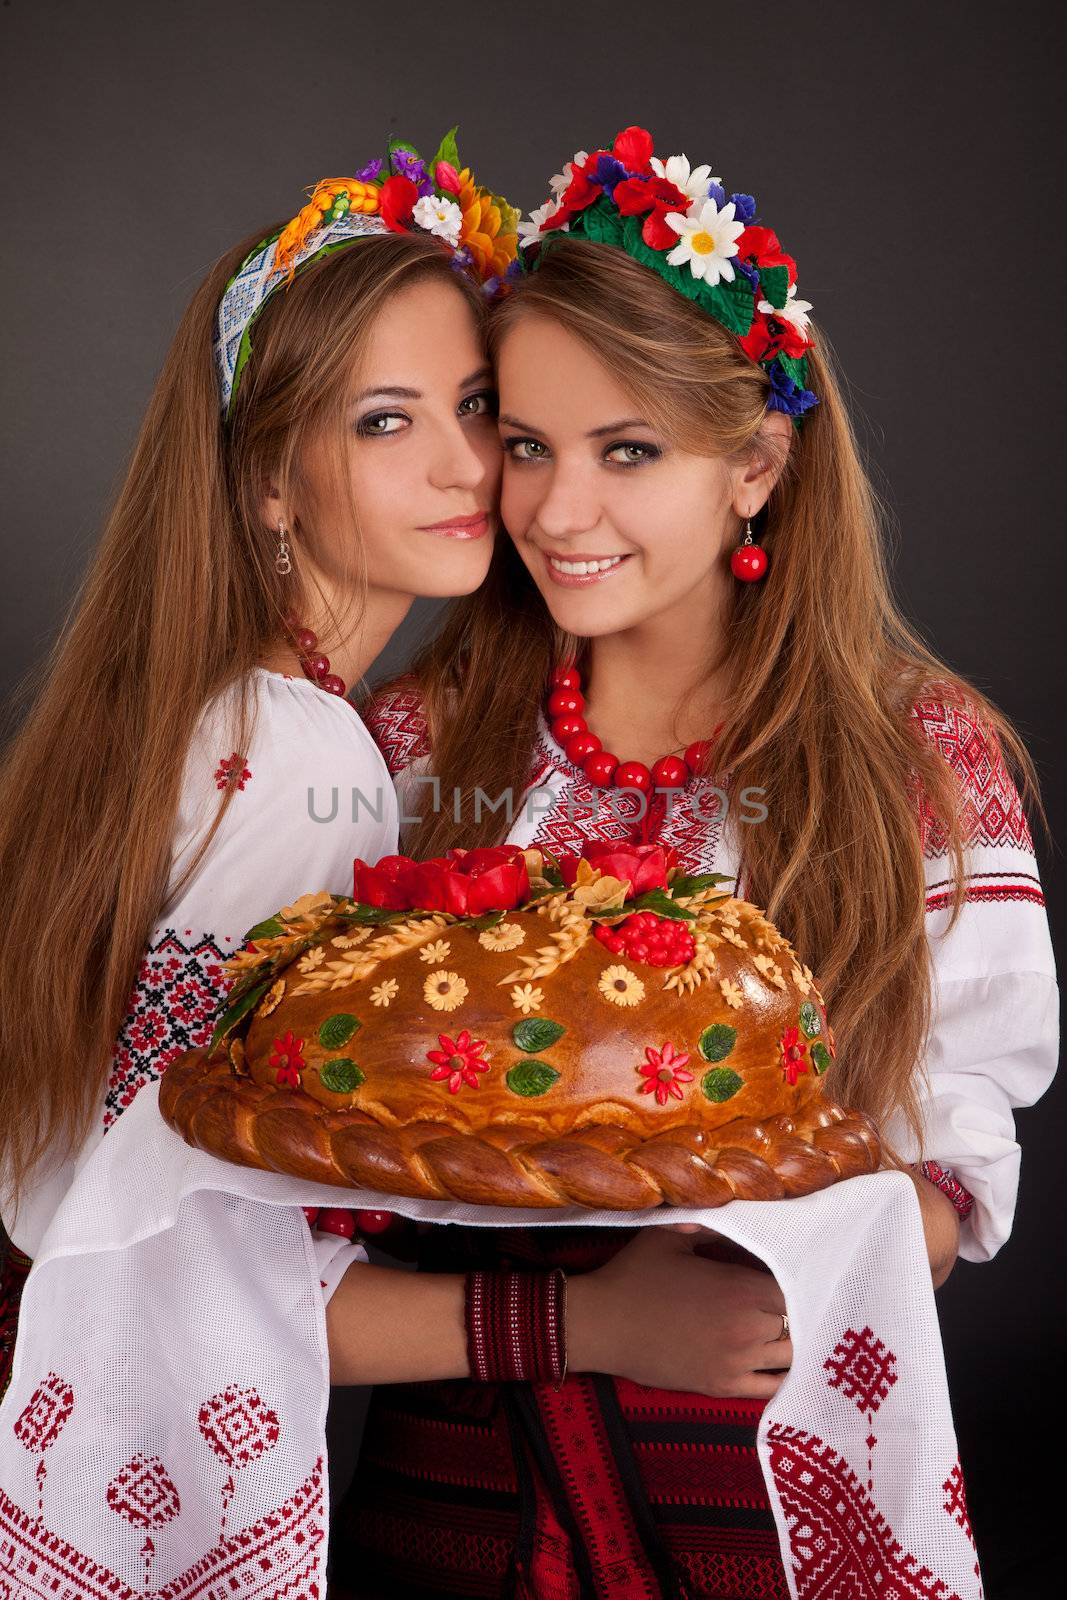 Young women in ukrainian clothes, with garland and round loaf on black background